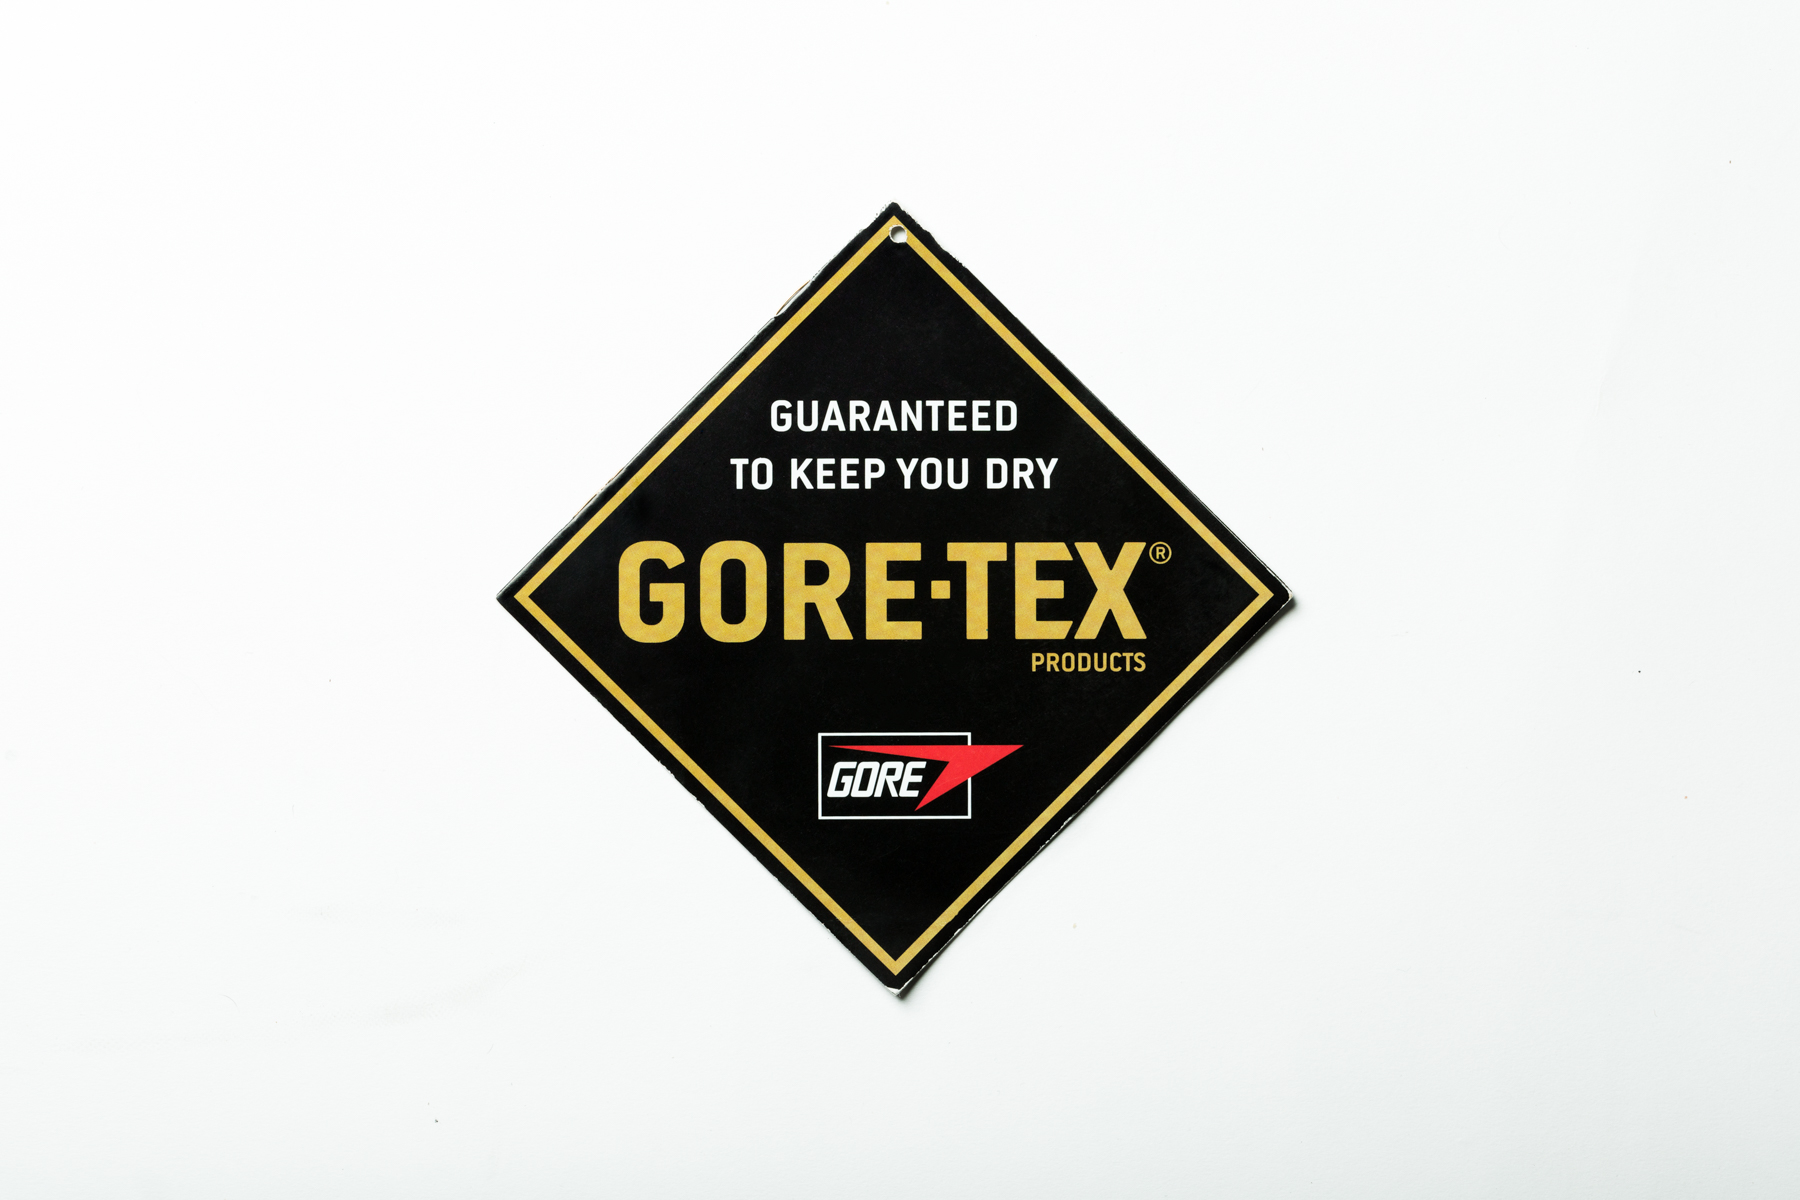 GORE Product Technology